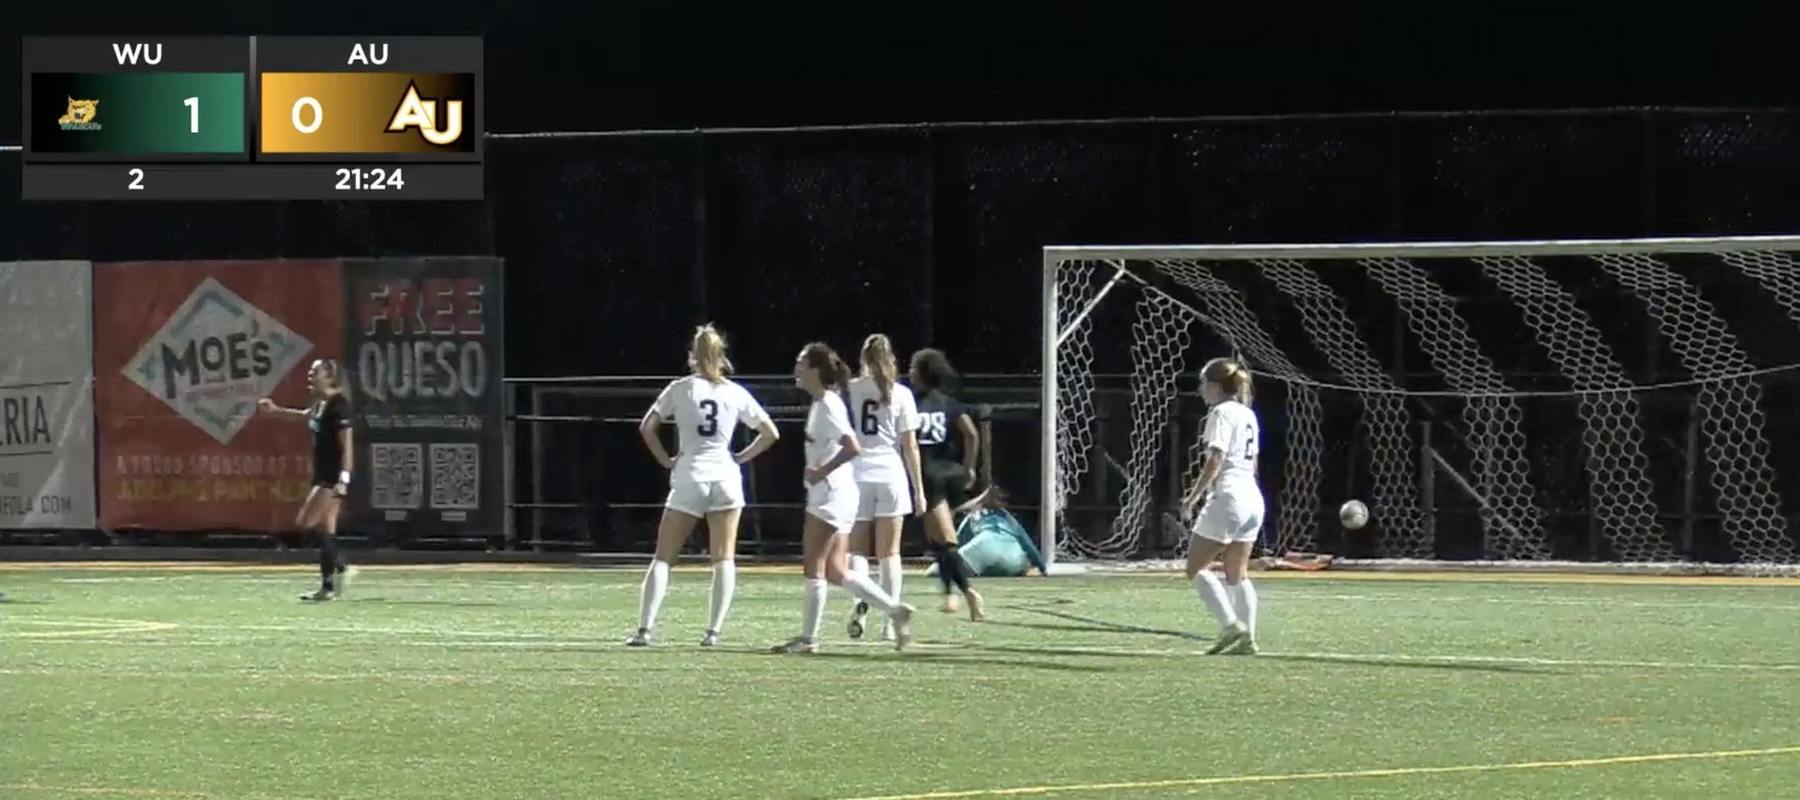 Manuel Restrepo buries her penalty to put the Wildcats up, 2-0, in the season opening win at Adelphi.